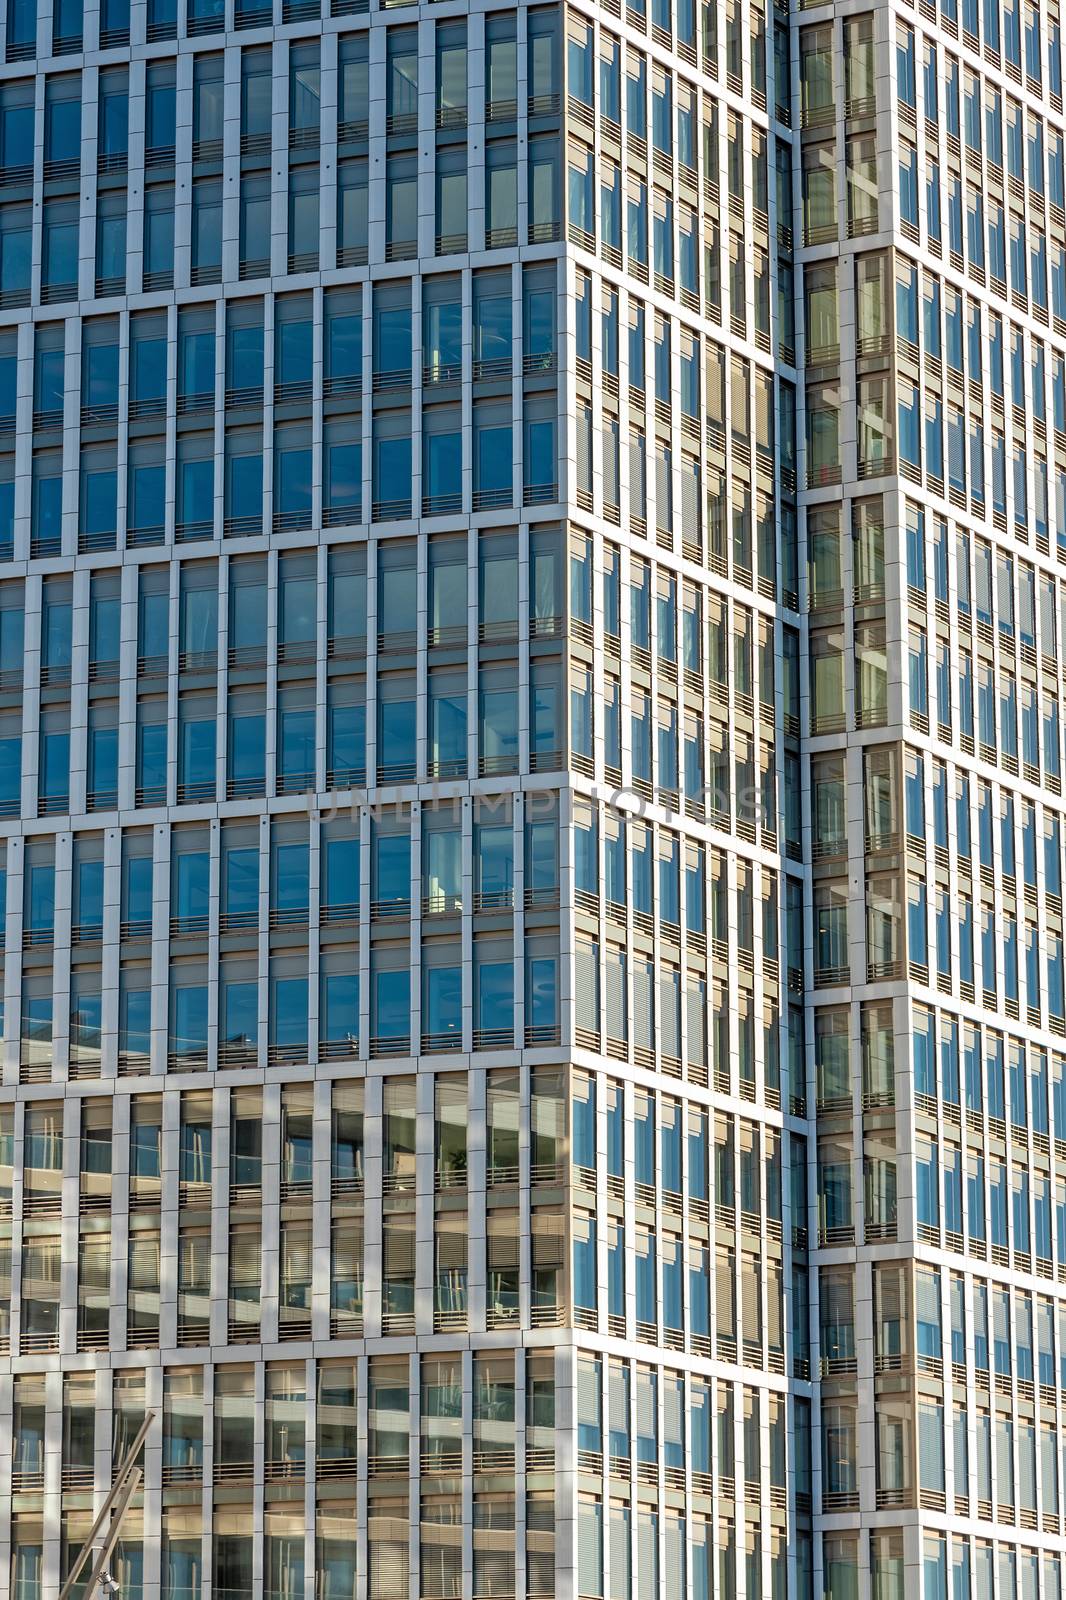 Glass facade of a modern office building seen in Hamburg, Germany